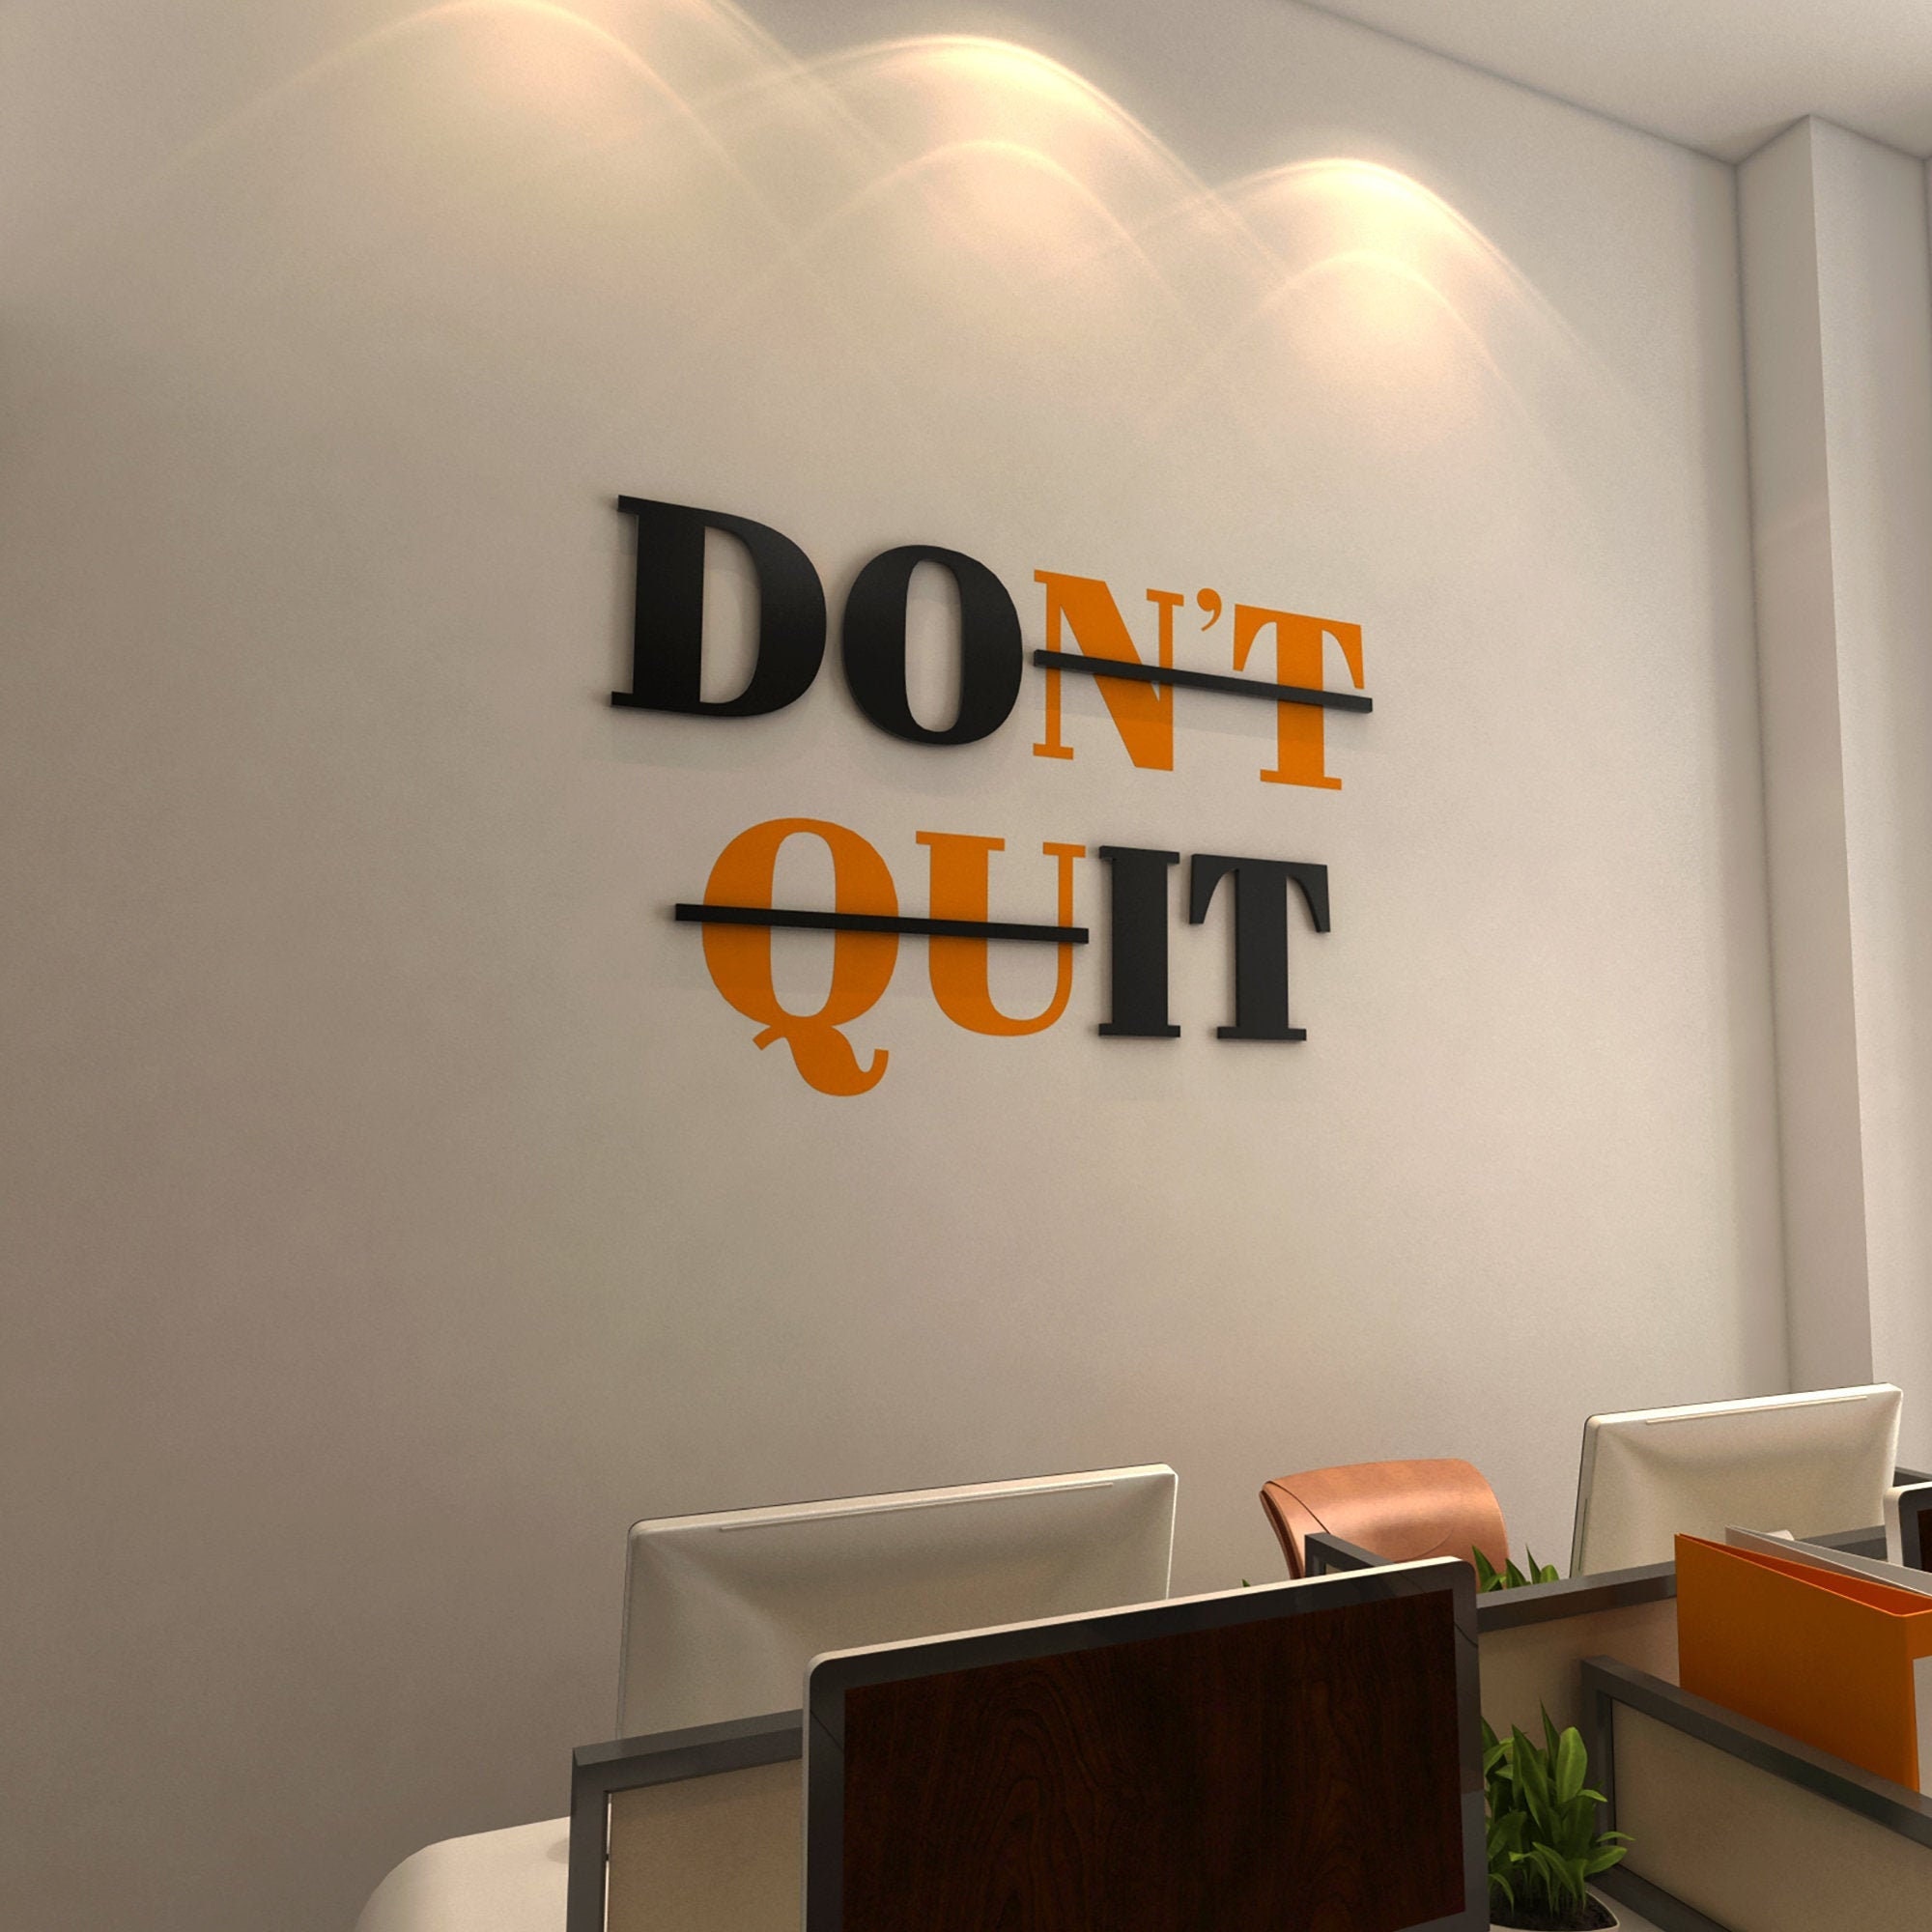 Dont Quit, Do It, Motivational Sign, Gym Office Decor, 3D Wall Decor, Gym  Wall Design, Inspirational Quotes, SKU:DNTQ - Etsy | Poster